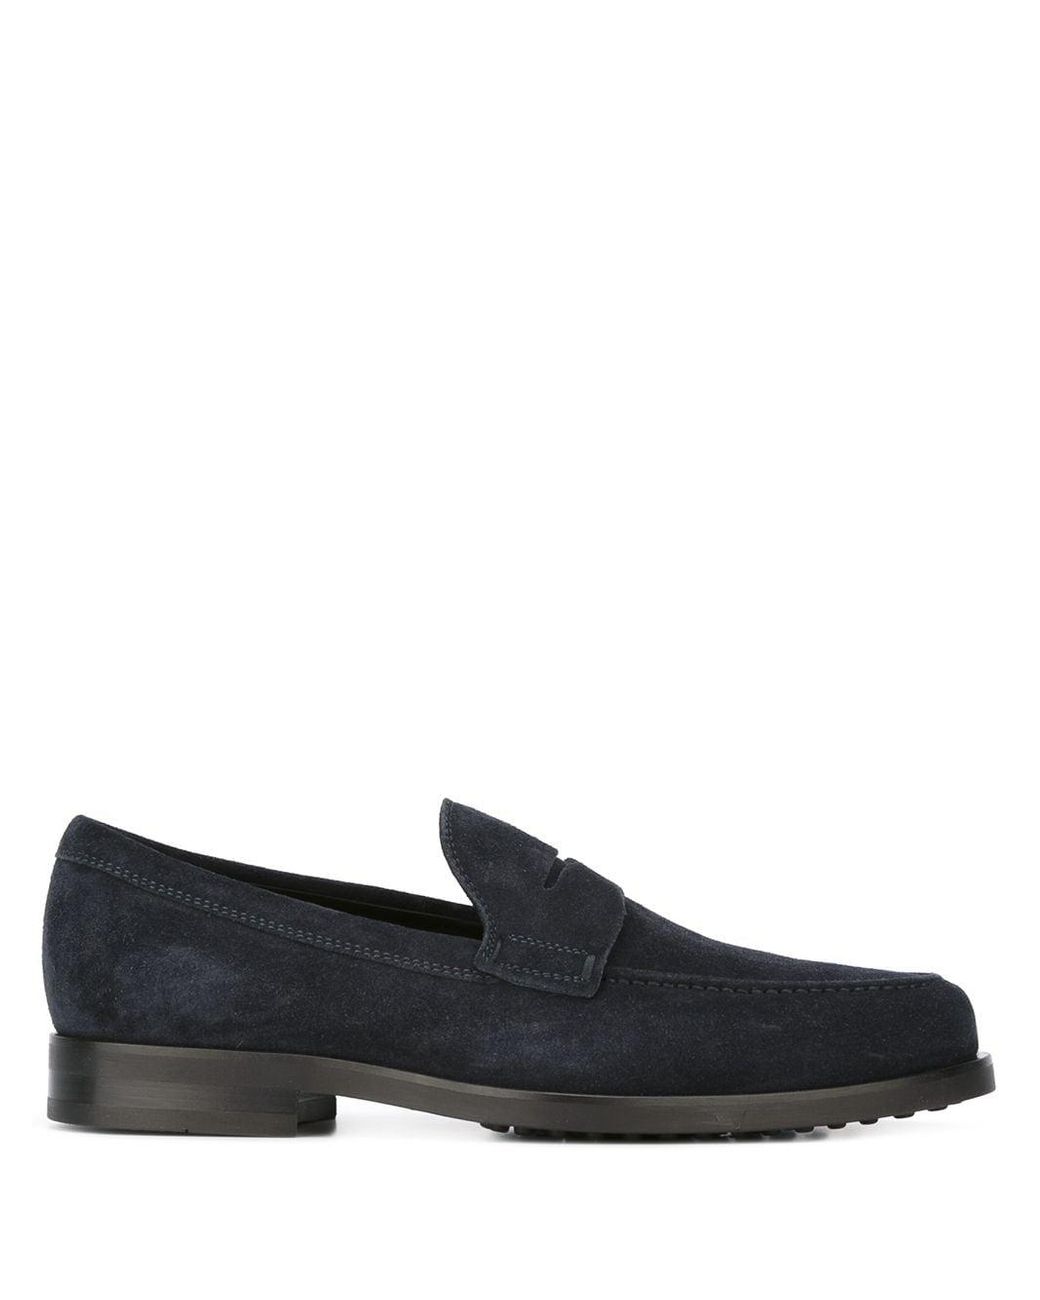 Tod's Suede Classic Loafers in Blue for Men - Lyst